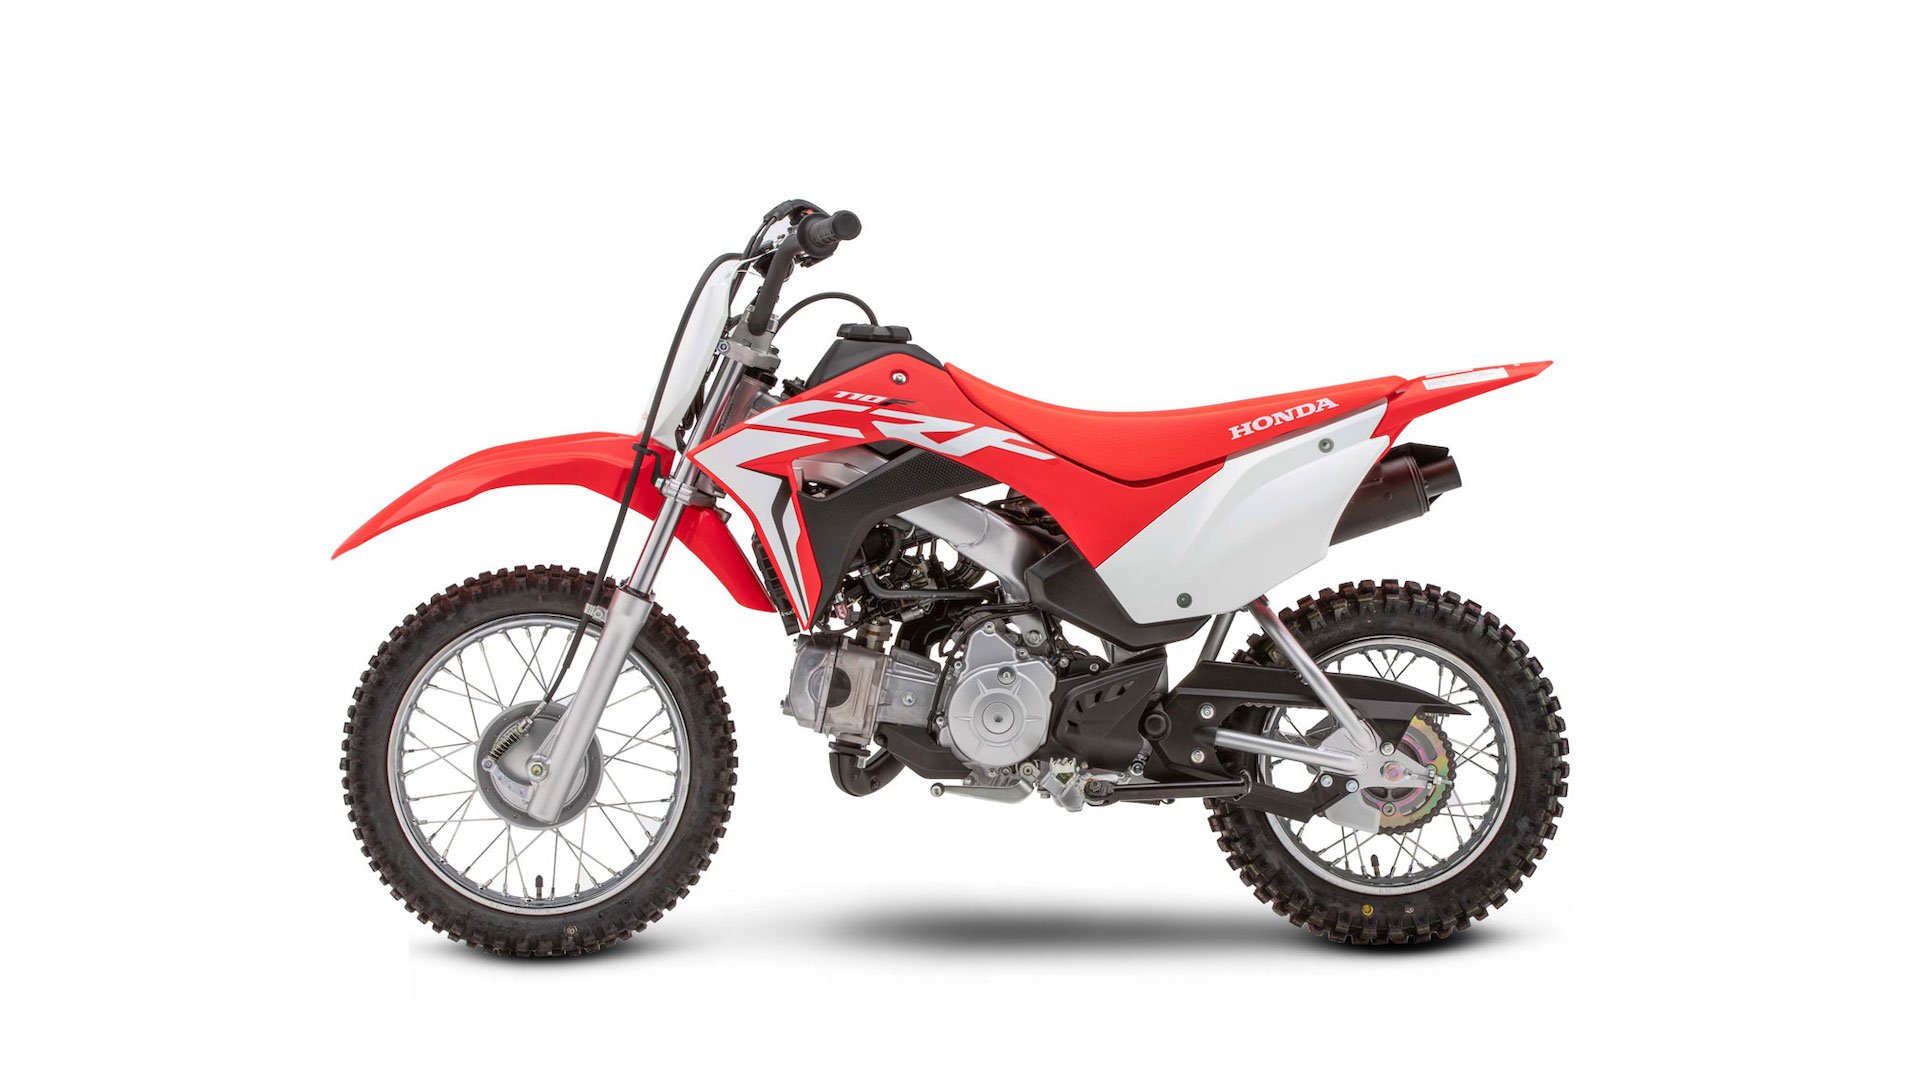 Find used motorbikes for sale on Auto Trader UK